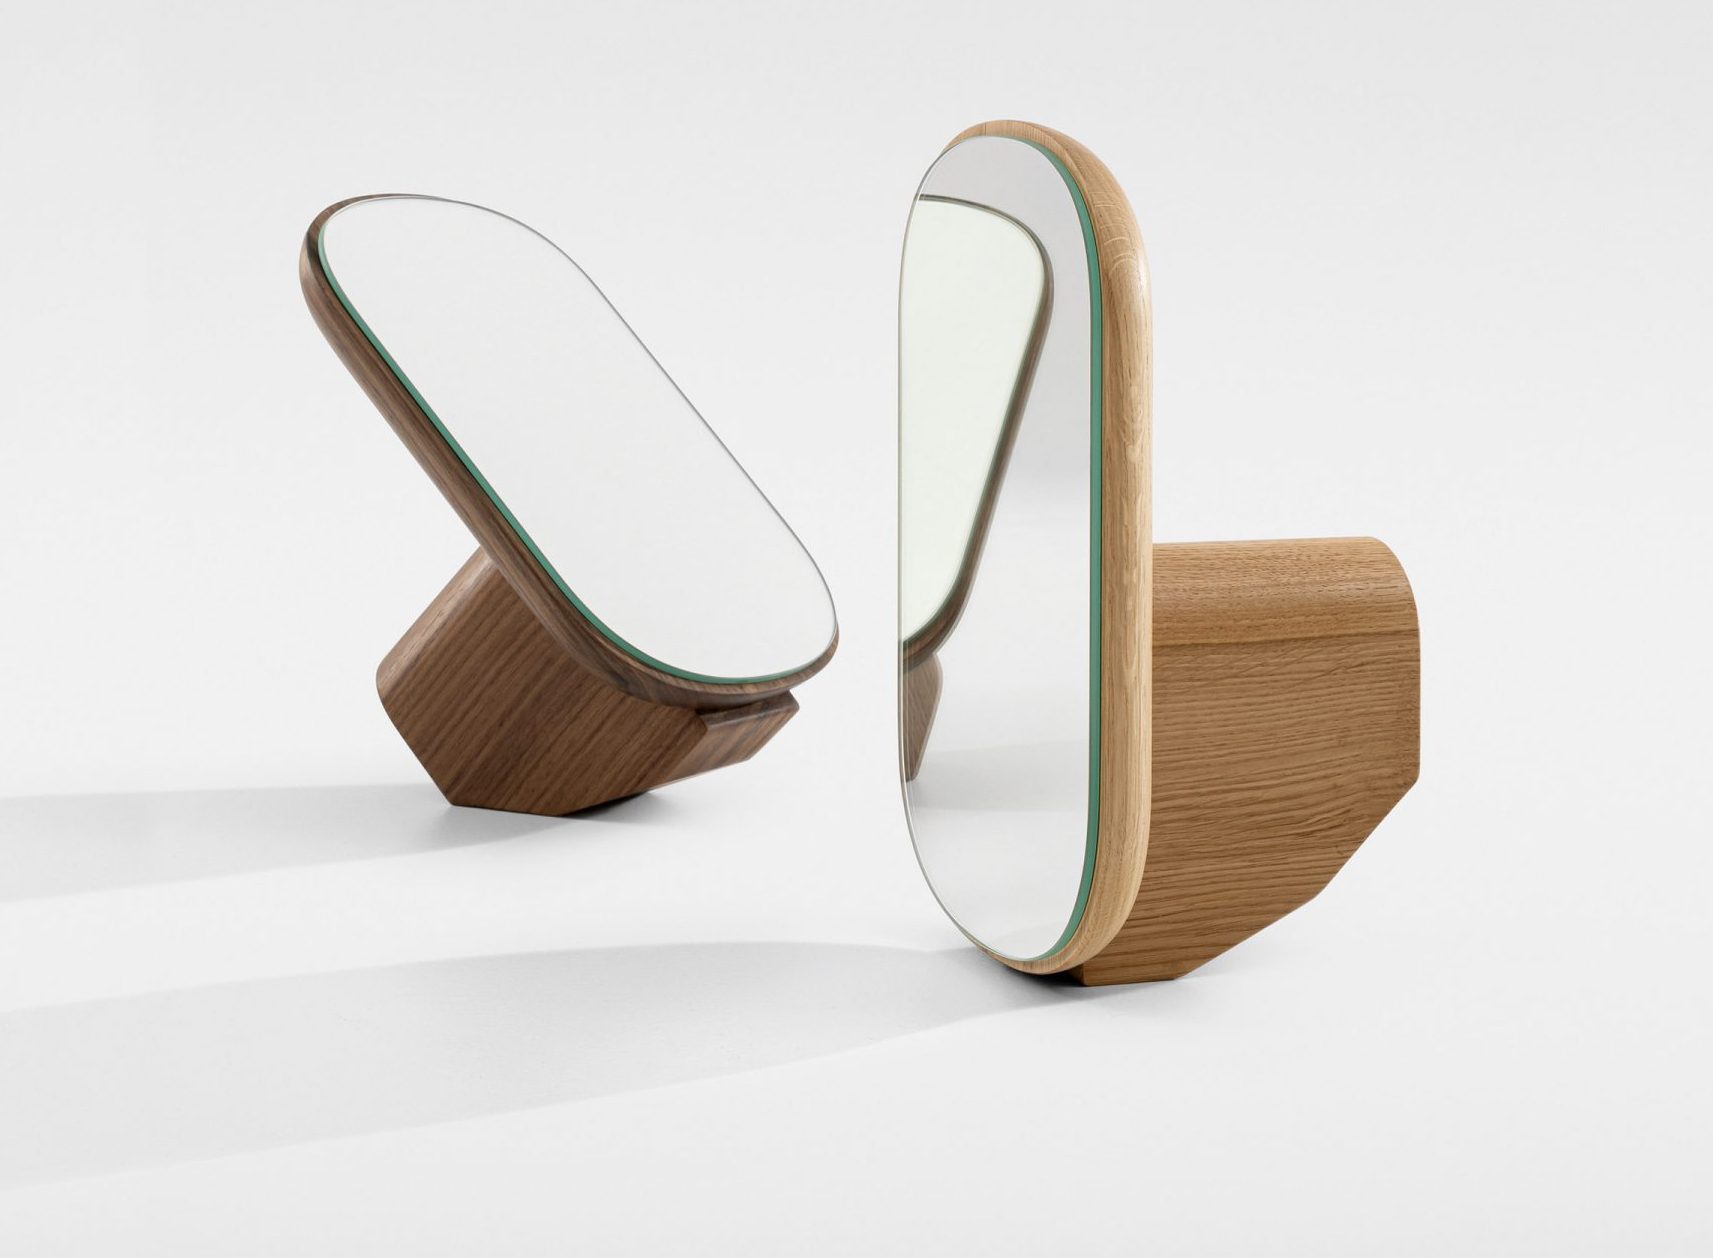 Two Ad Mire vanity mirrors titled at different angles